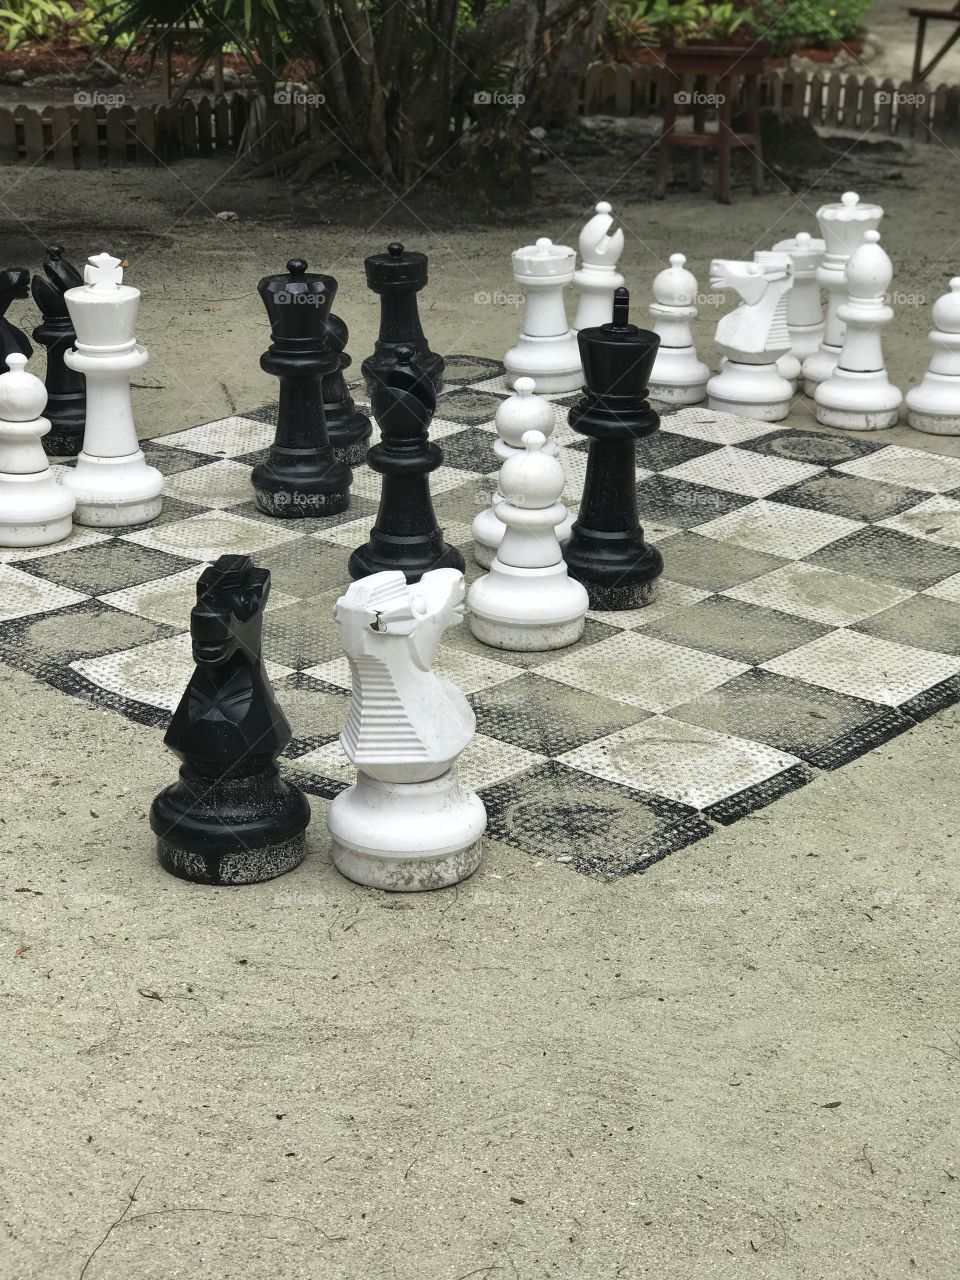 Enjoy a strategic game of chess on the beautiful beaches of Honduras. This giant game board is fun to play when you put your mind to it.